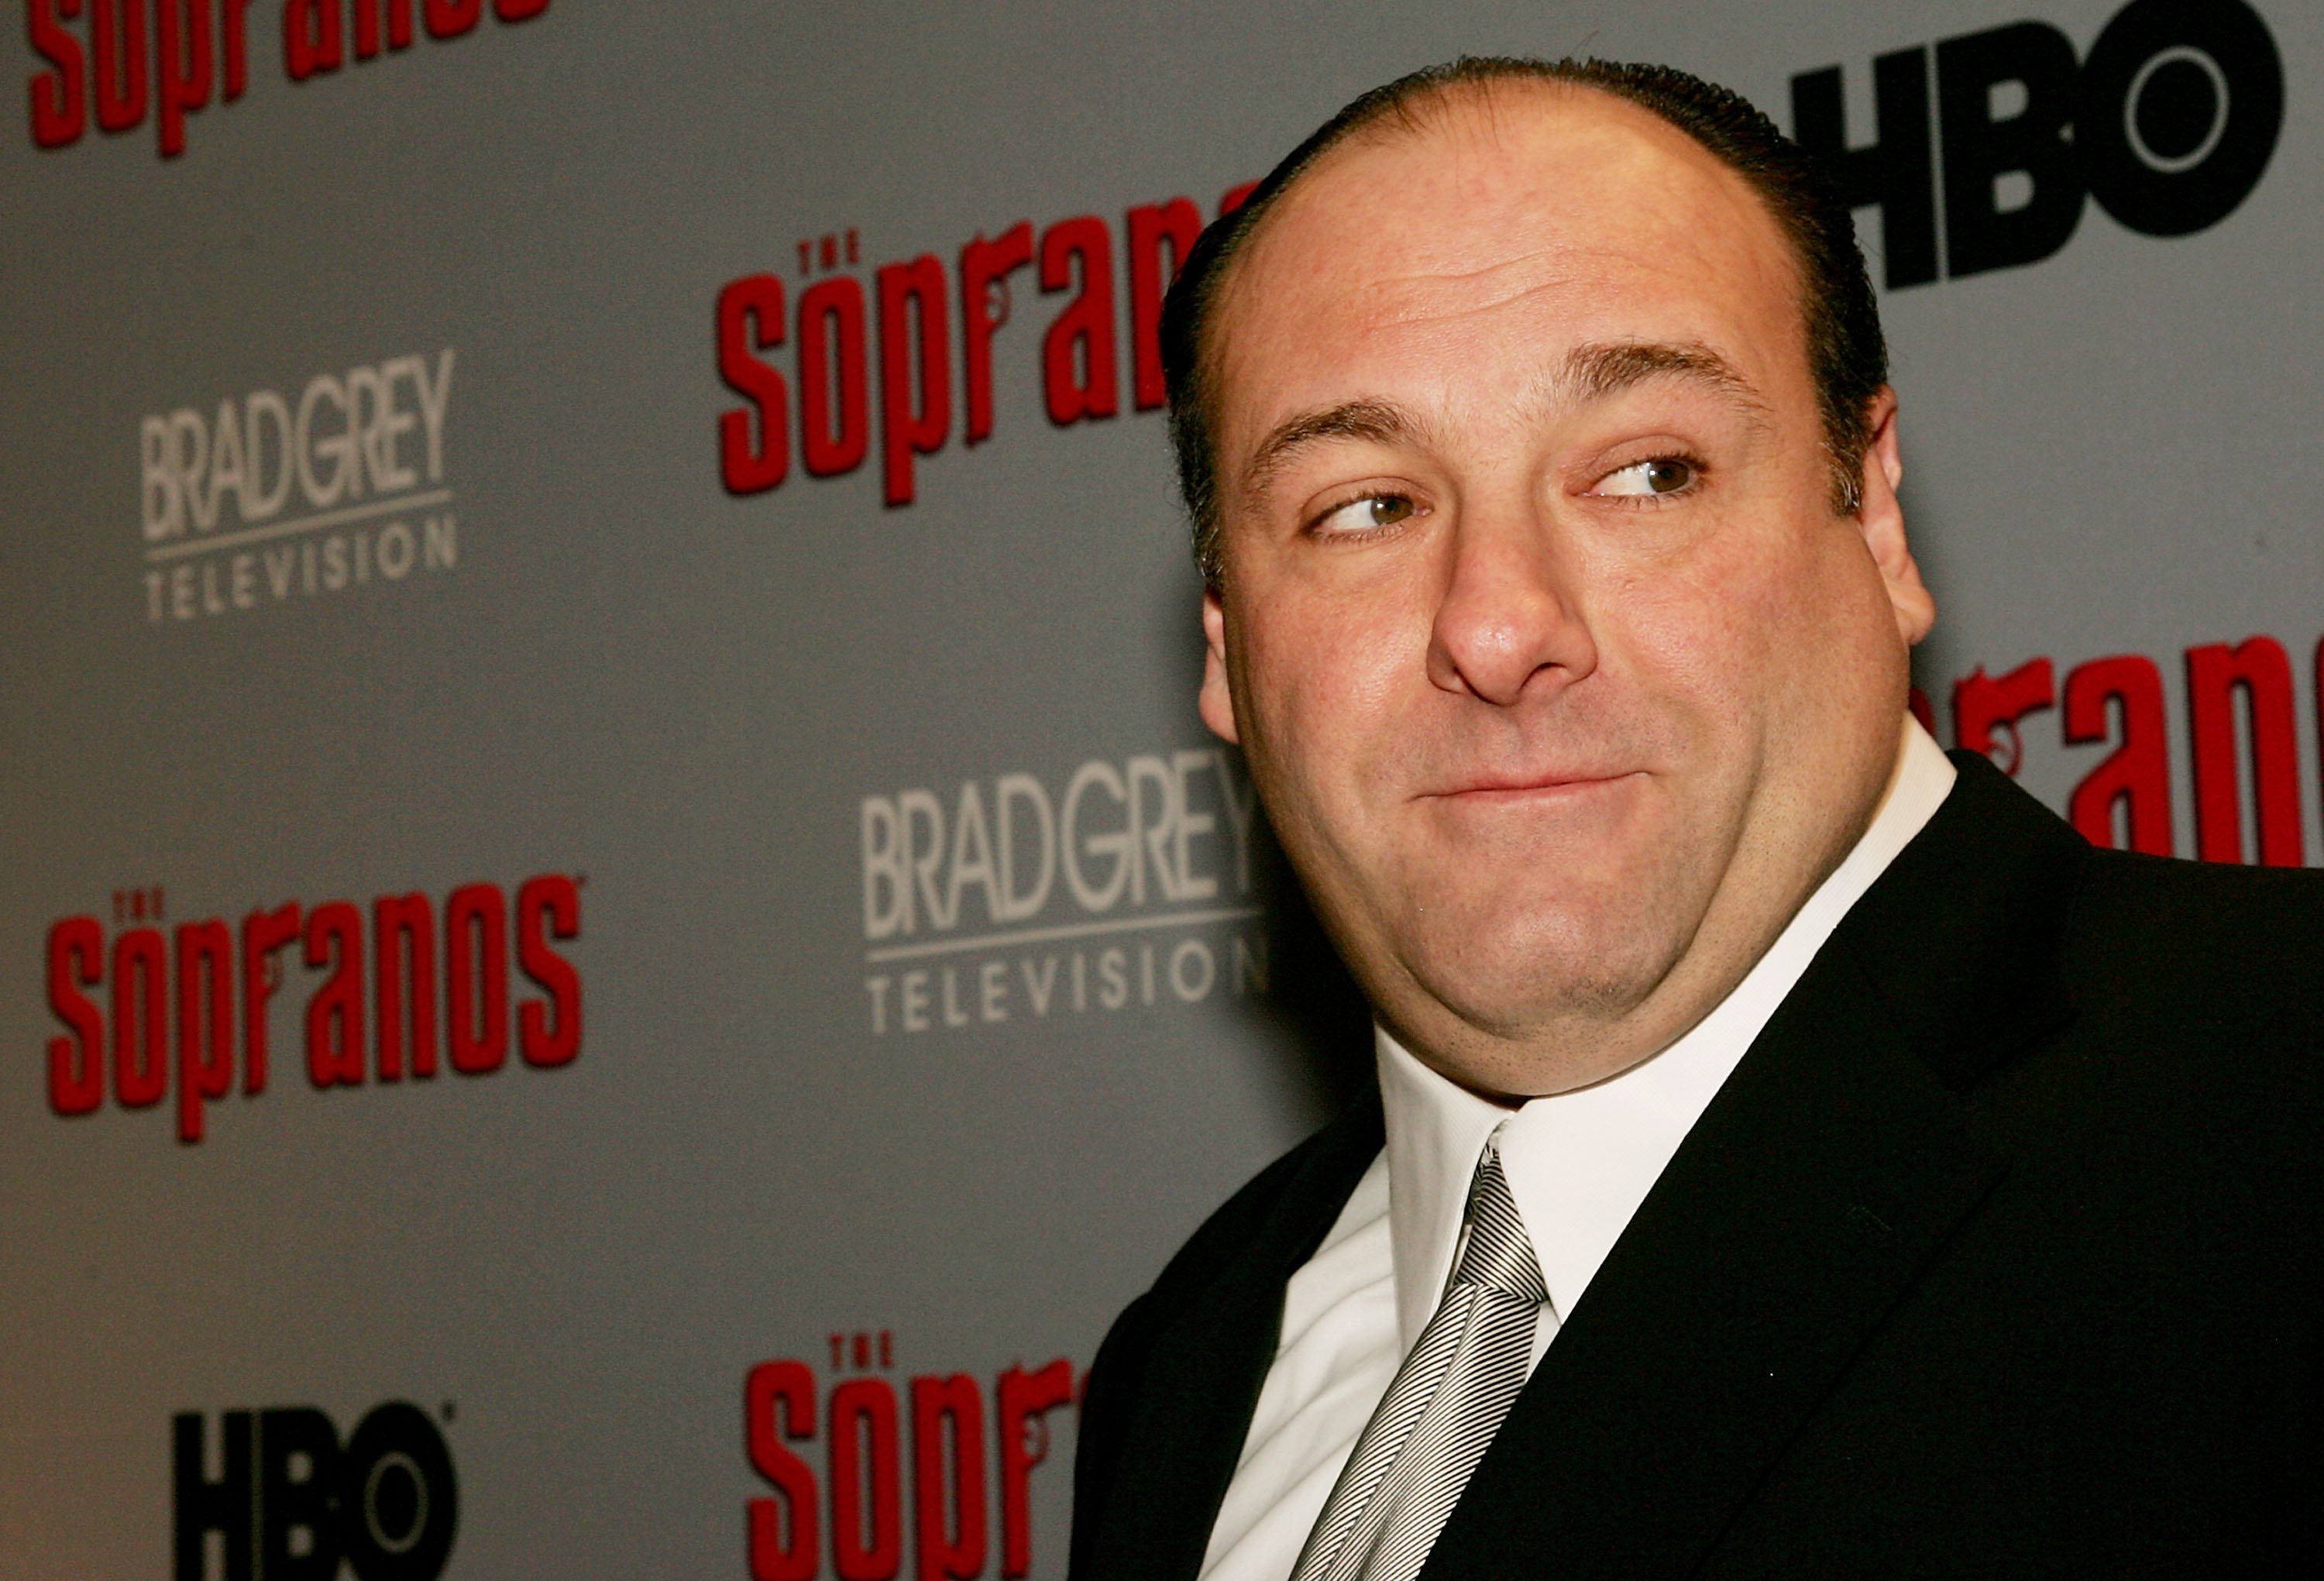 James Gandolfini attends the sixth season premiere of "The Sopranos" at the Museum Of Modern Art, on March 7, 2006 in New York City. | Source: Getty Images